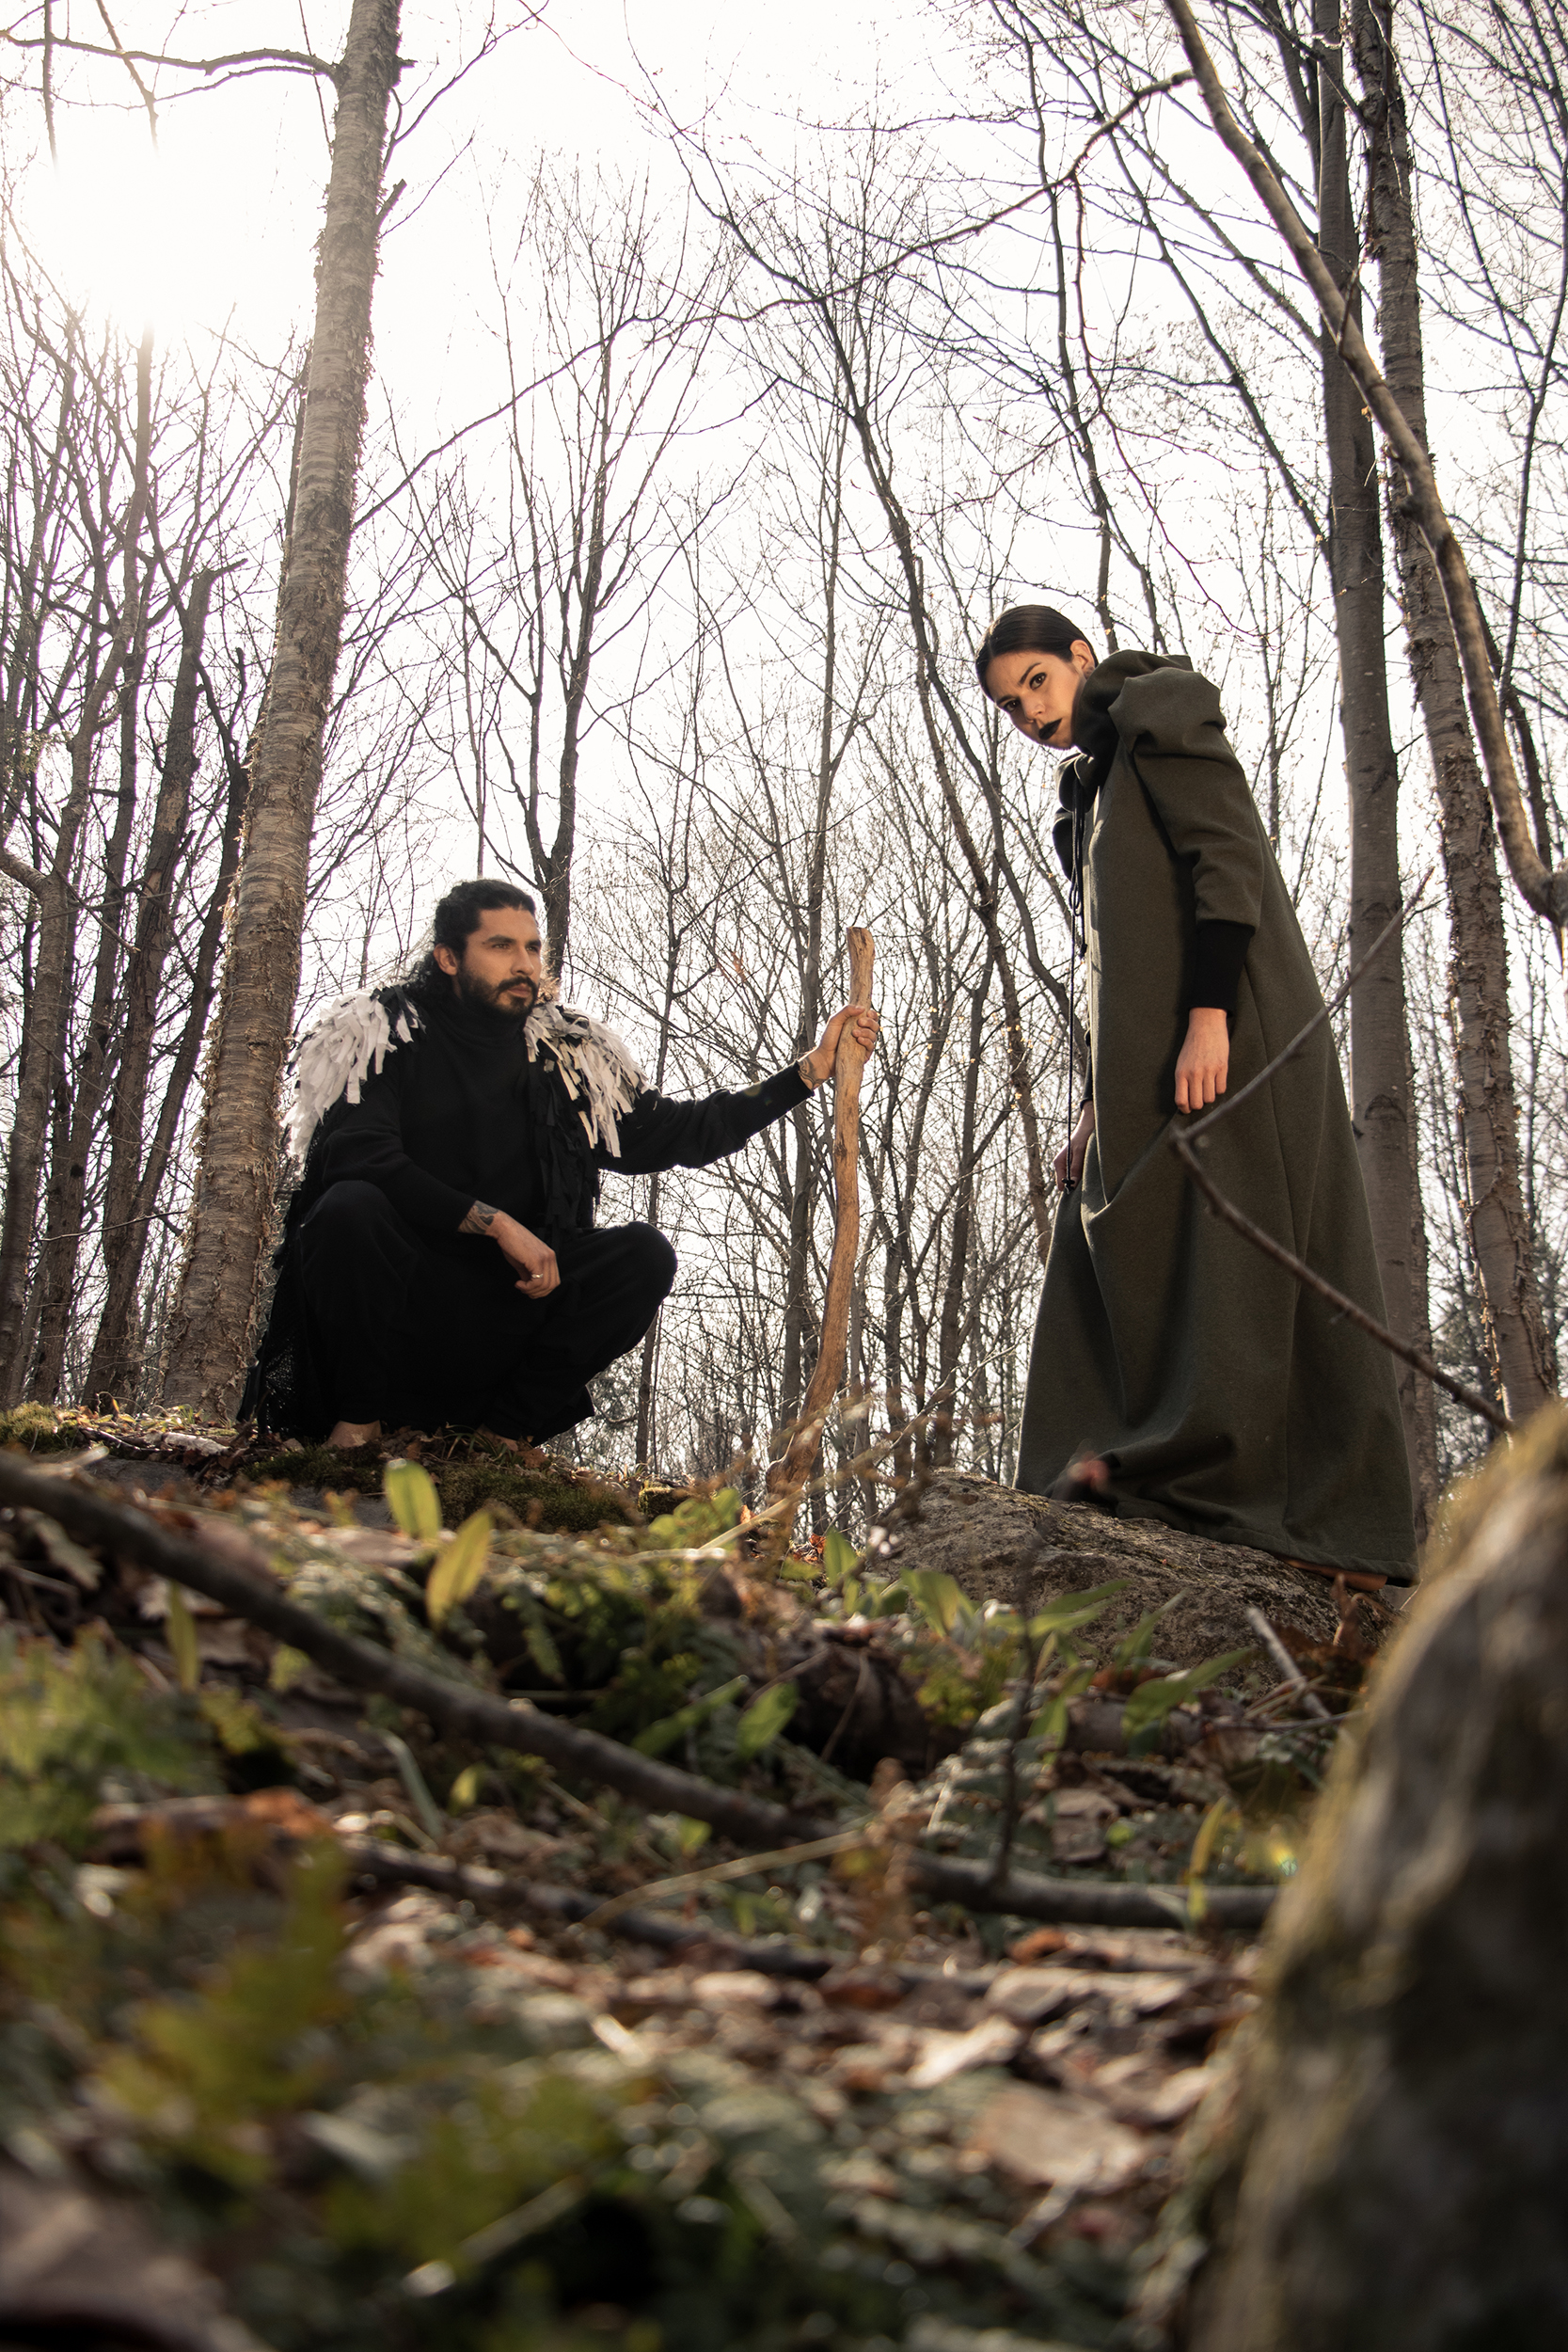 Man wearing sustainable organic cotton black tracksuit with zero waste fringed cape and woman wearing organic cotton green dress in the woods